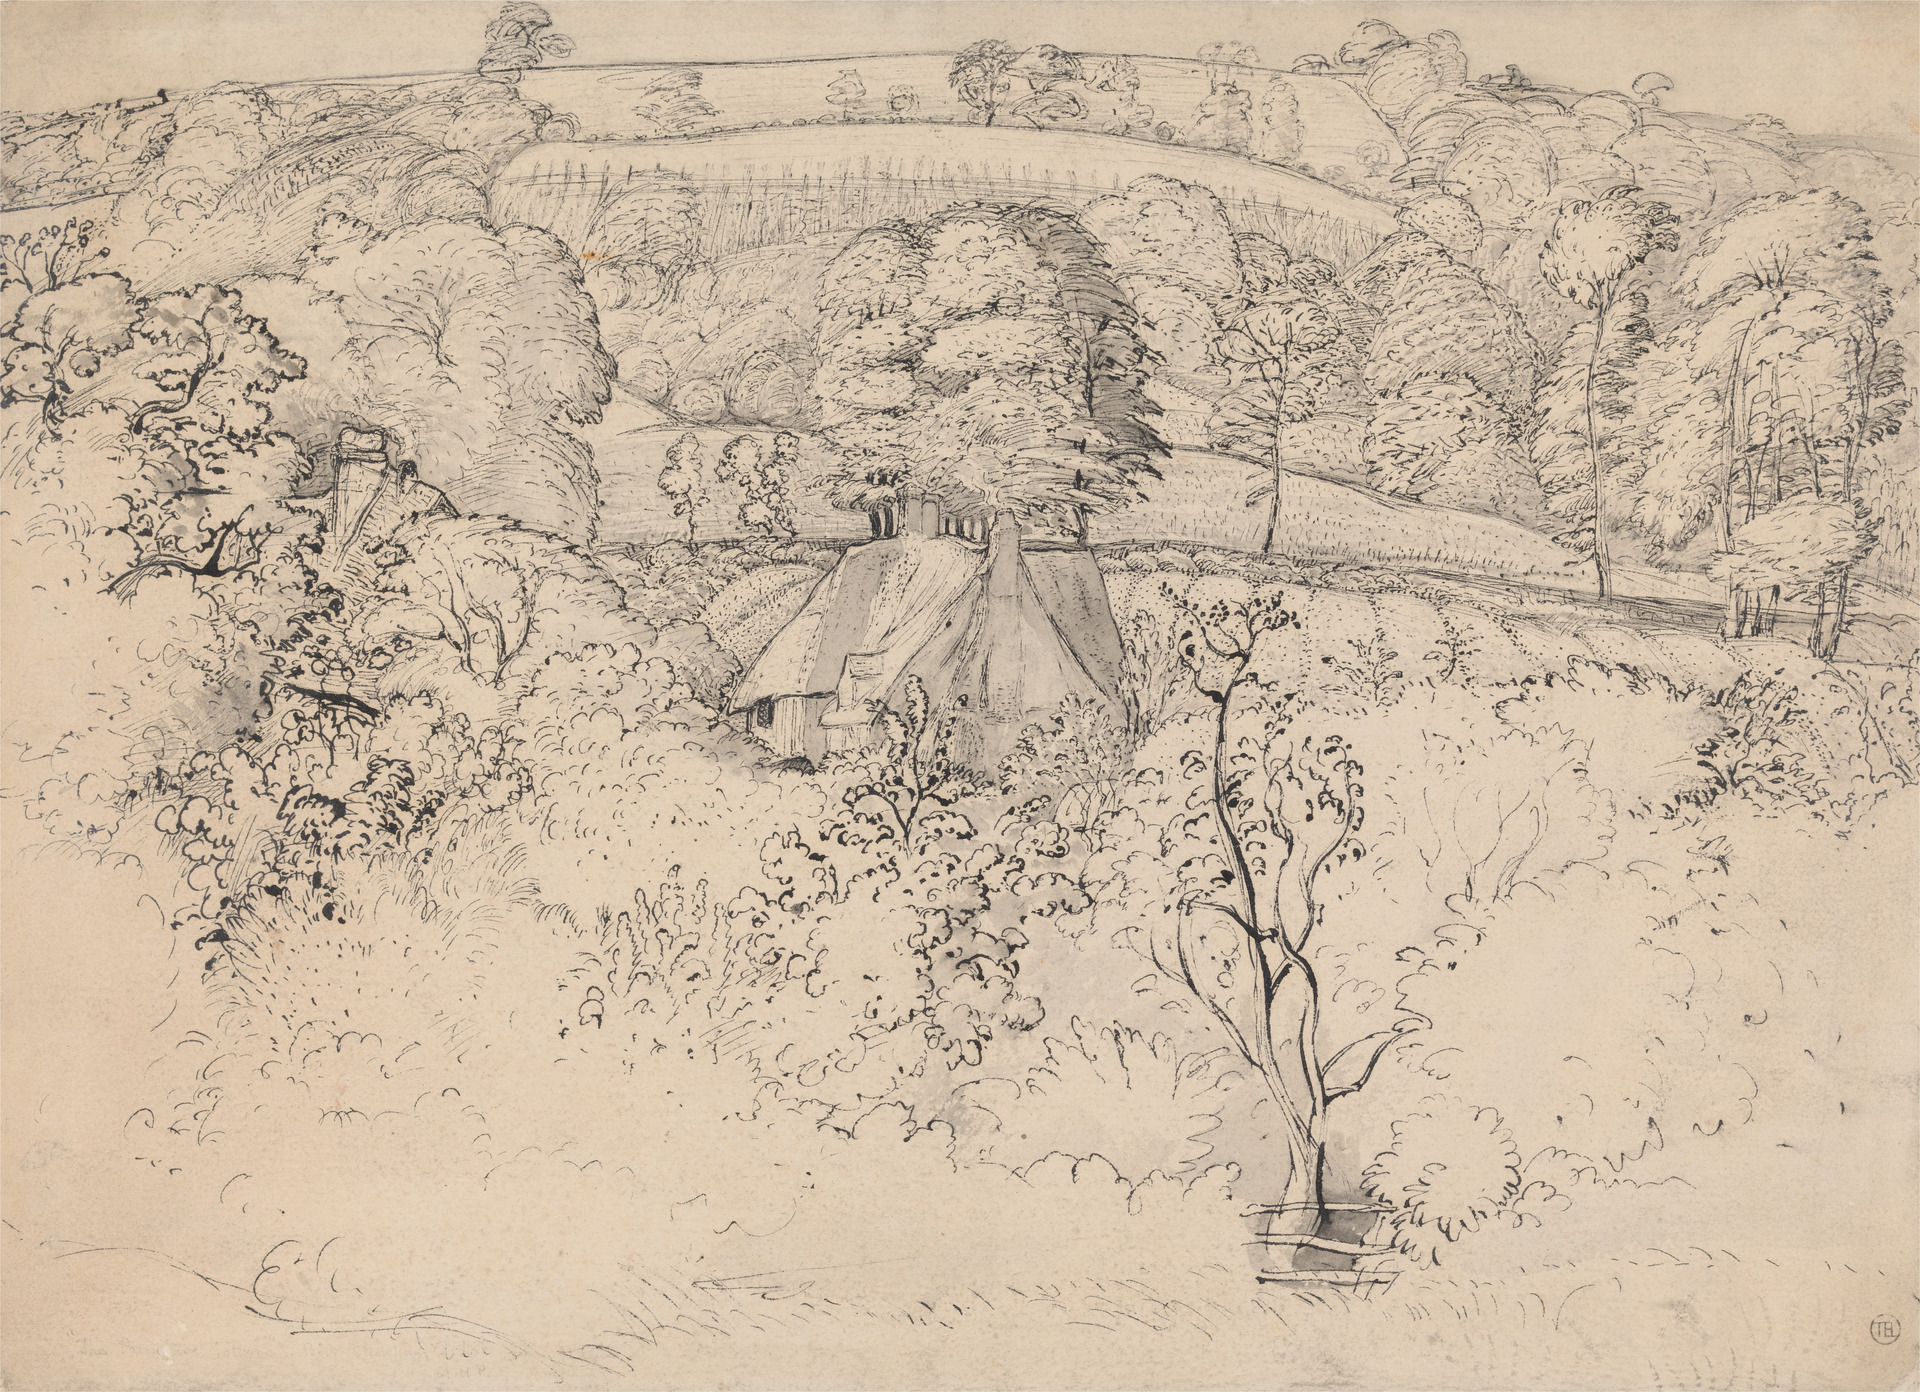 Sketch of house in middle of trees and hills behind